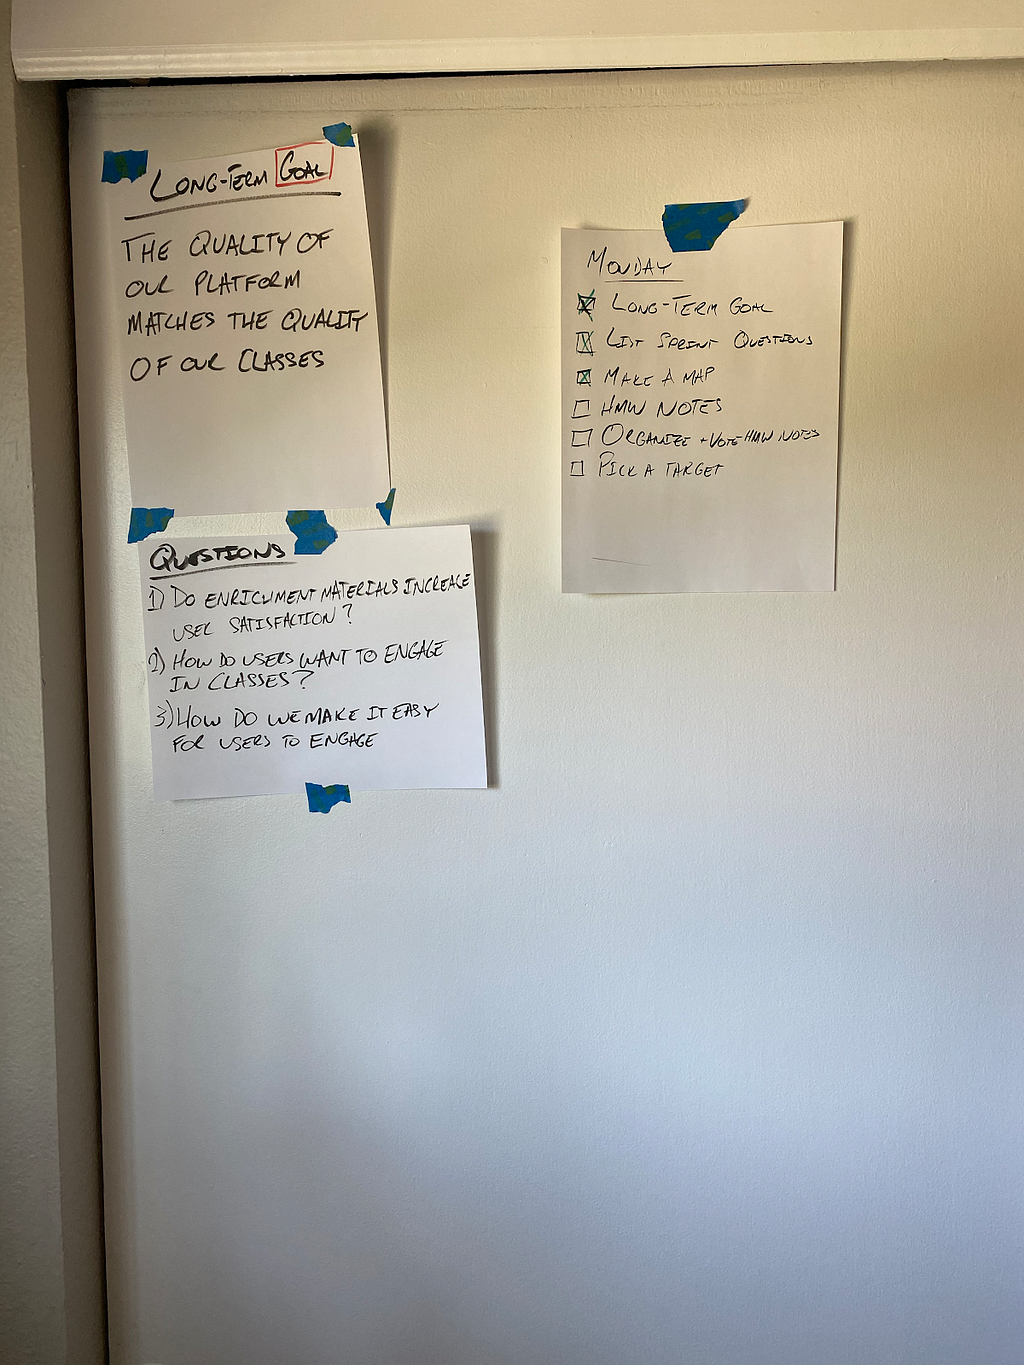 A picture of my “whiteboard” by EOD Monday. It includes the questions mentioned, the longterm goal, and a checklist